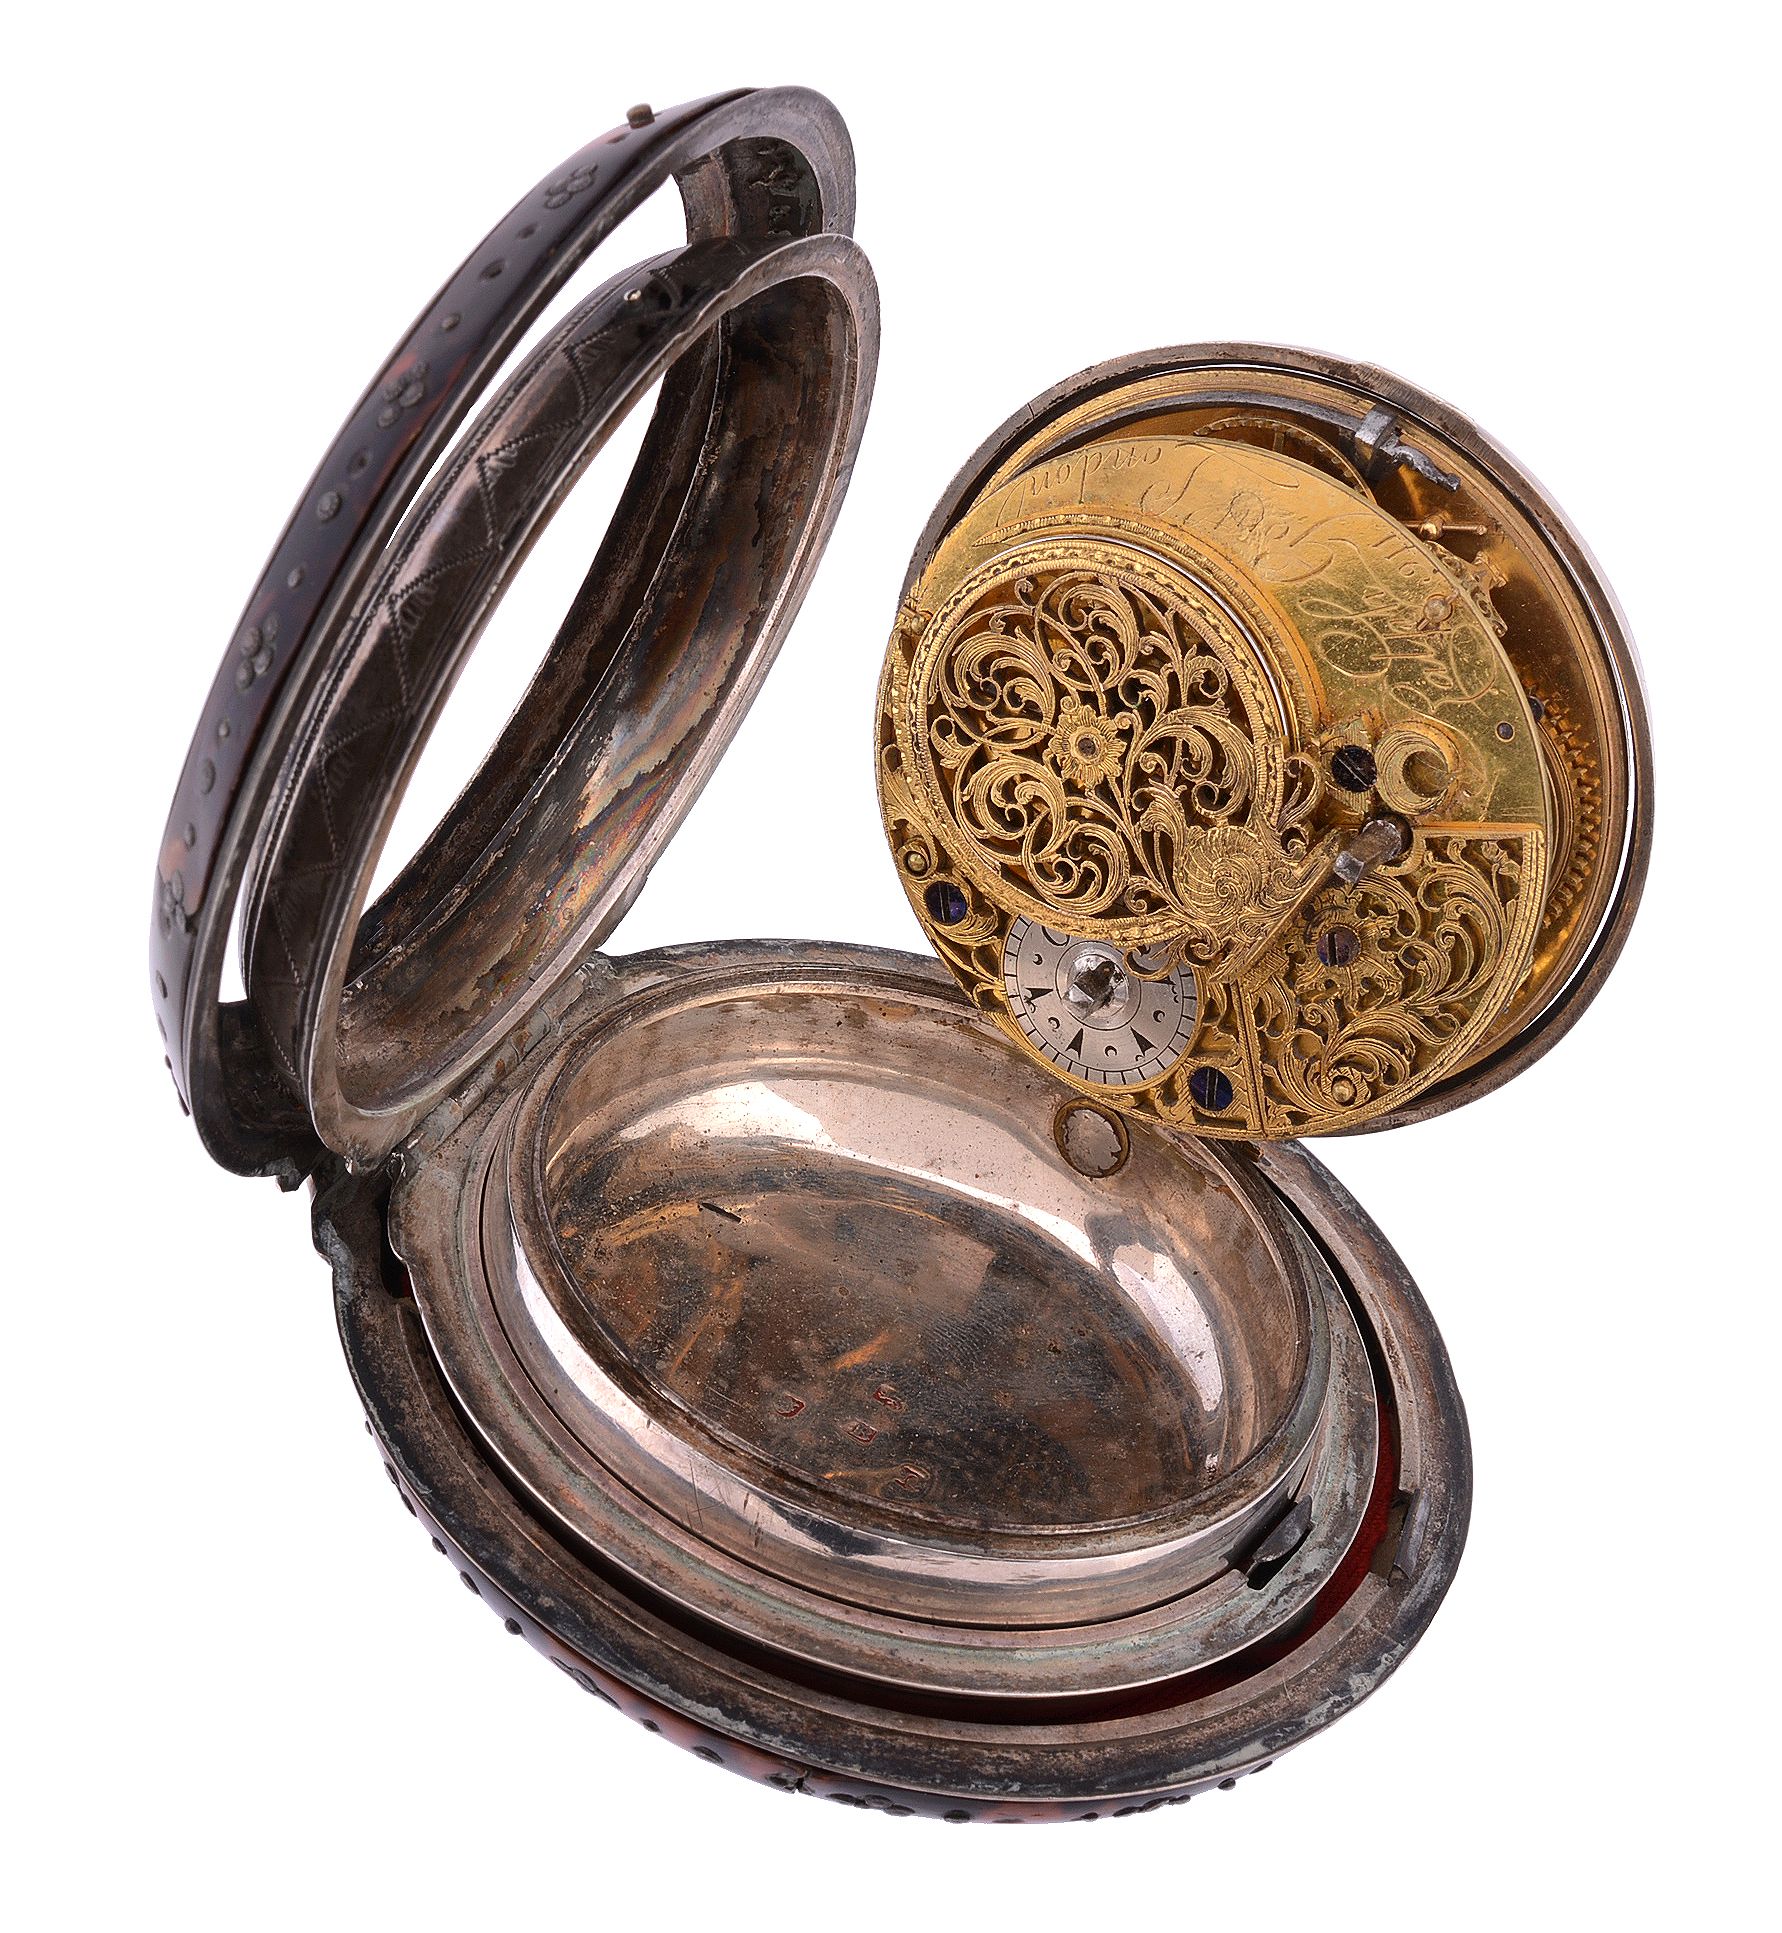 A fine George III silver and tortoiseshell triple-cased oversized verge... - Image 2 of 3